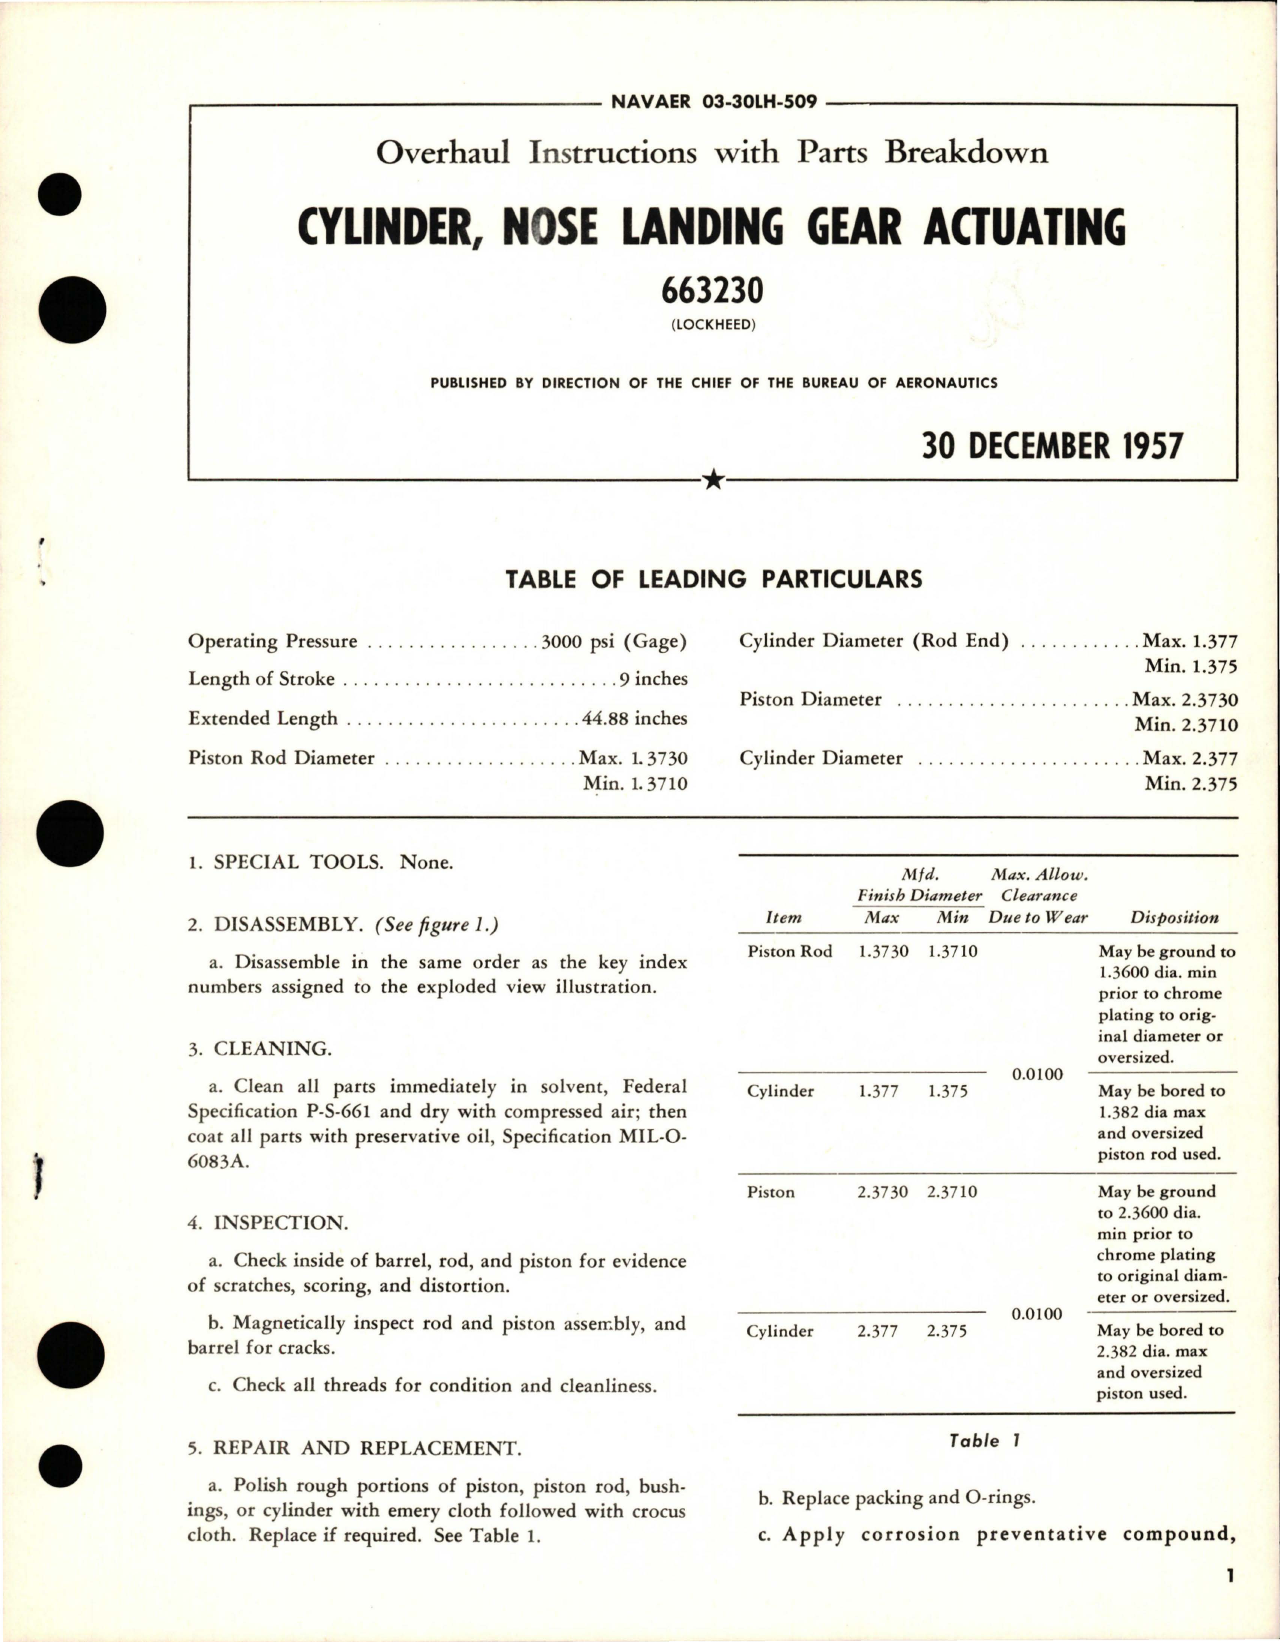 Sample page 1 from AirCorps Library document: Overhaul Instructions with Parts Breakdown for Nose Landing Gear Actuating Cylinder - 663230